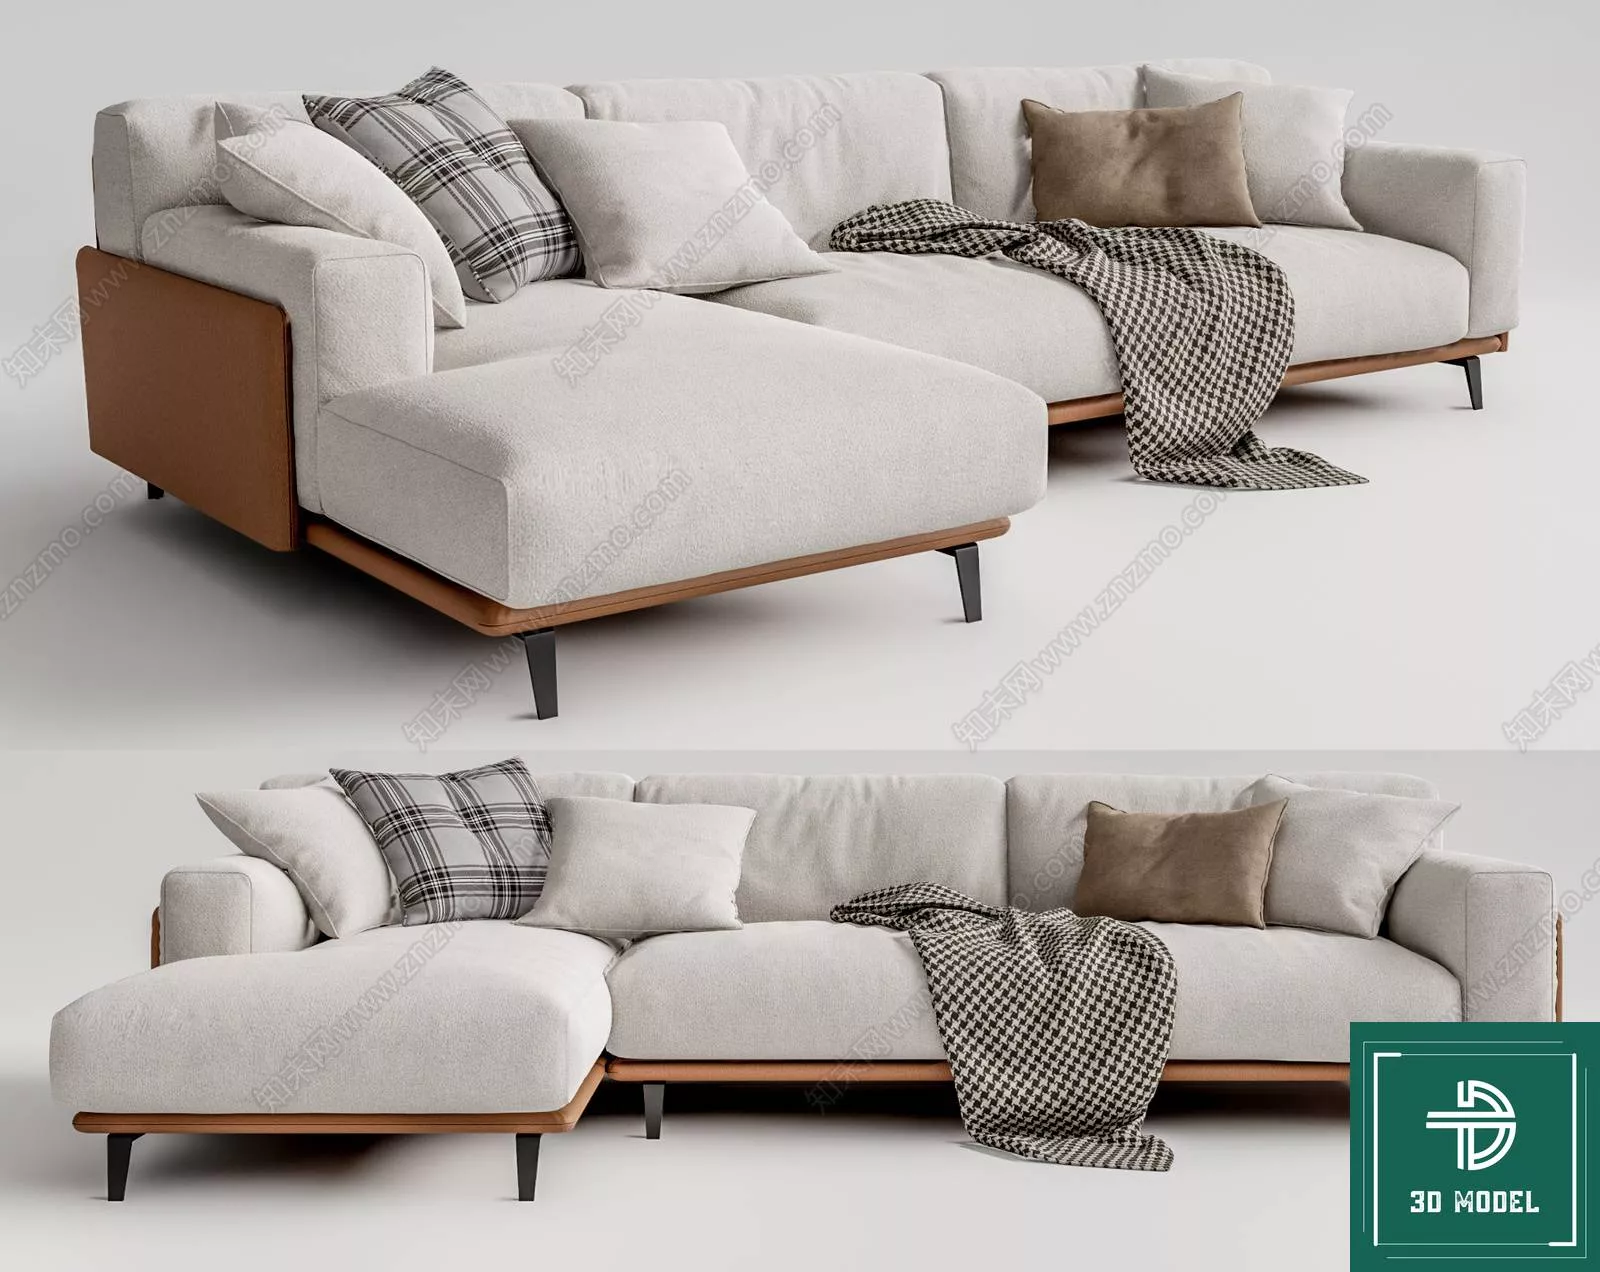 MODERN SOFA - SKETCHUP 3D MODEL - VRAY OR ENSCAPE - ID13378